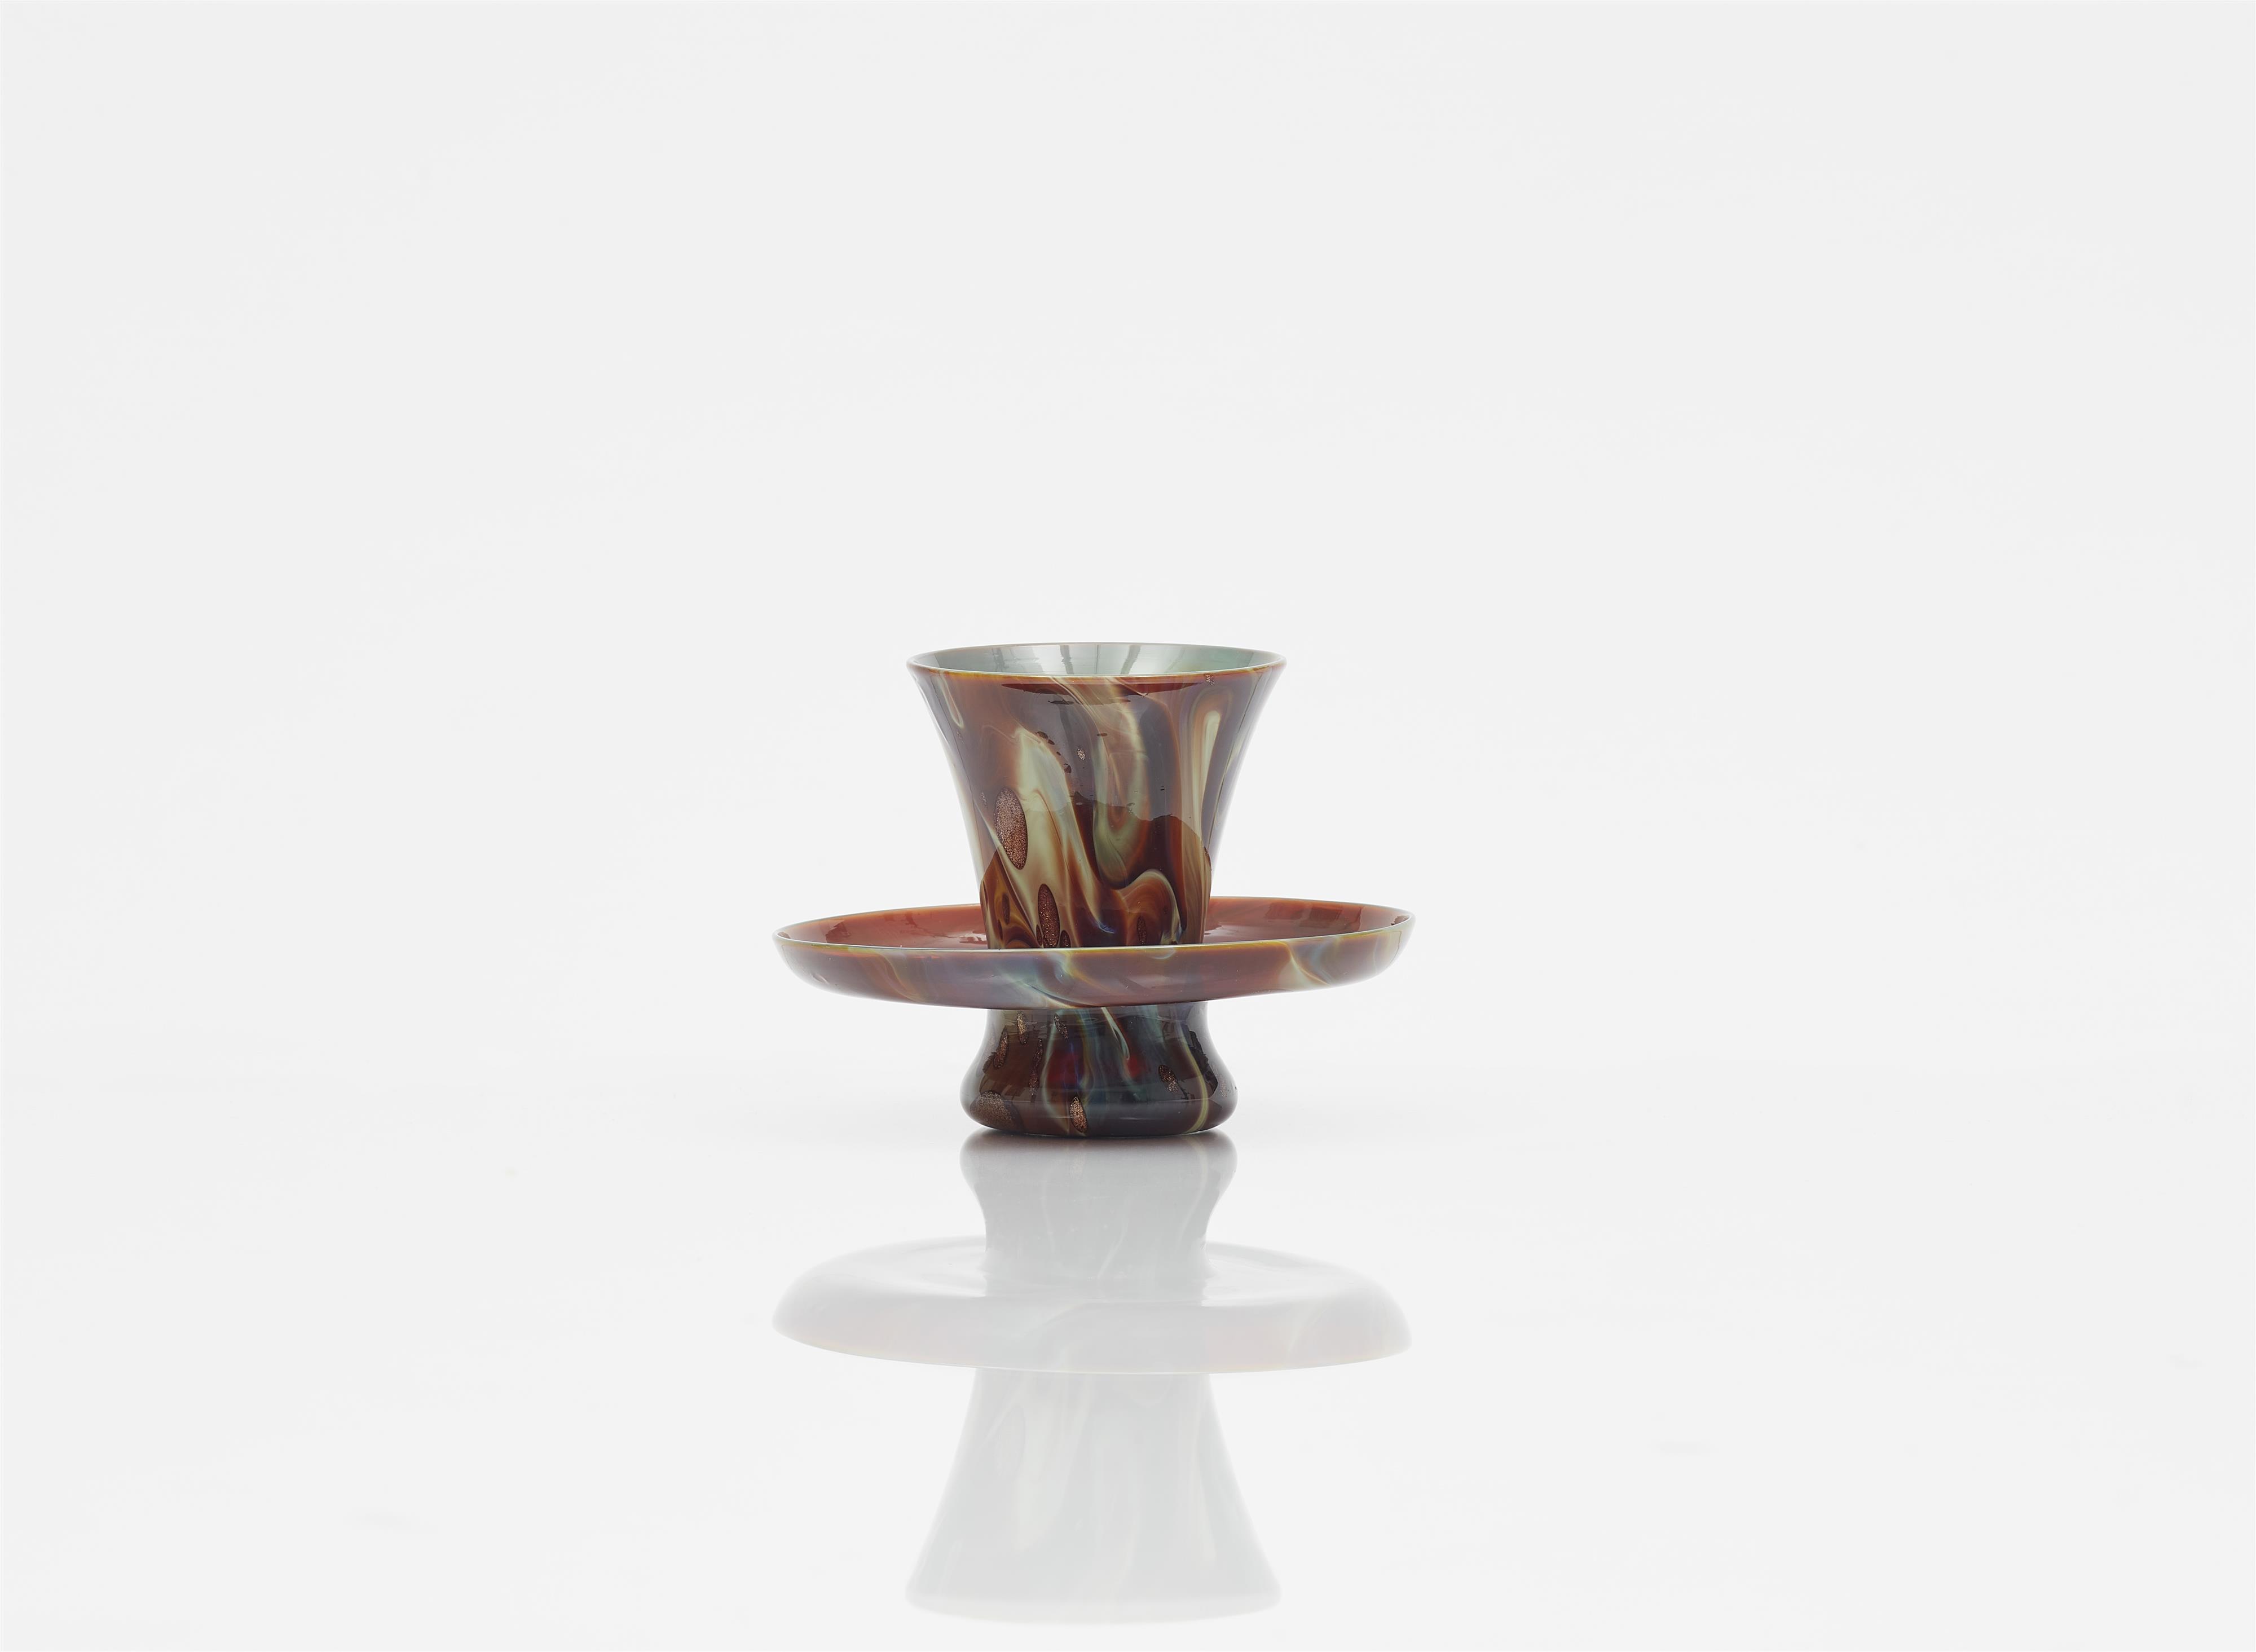 A marbled glass trembleuse cup
Venice, late 19th / early 20th C. - image-1